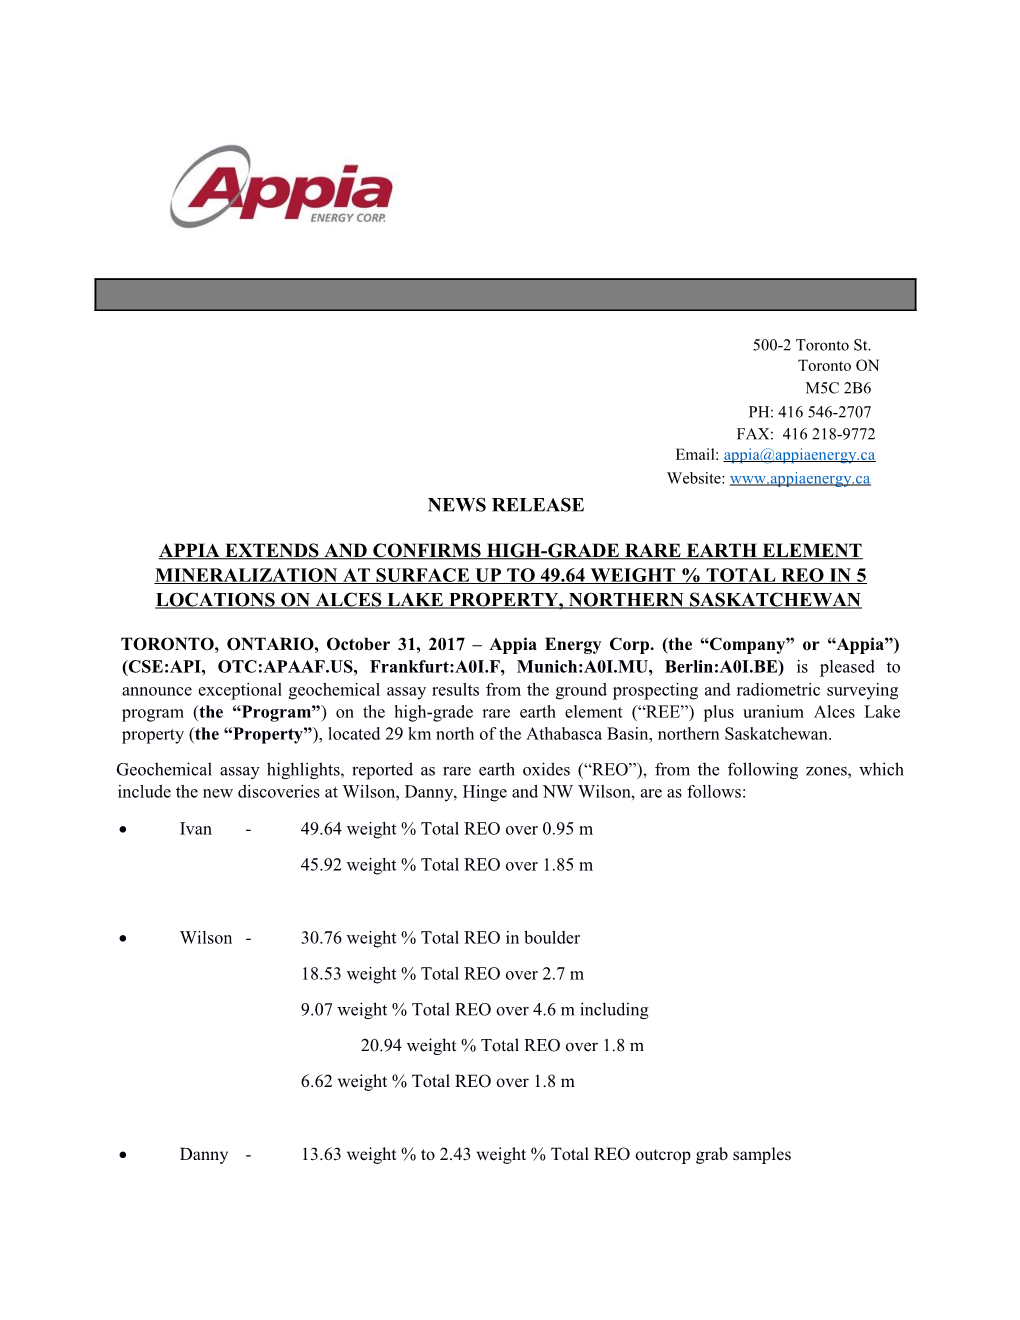 Appia Extends and Confirms High-Grade Rare Earth Elementmineralization at Surface up To